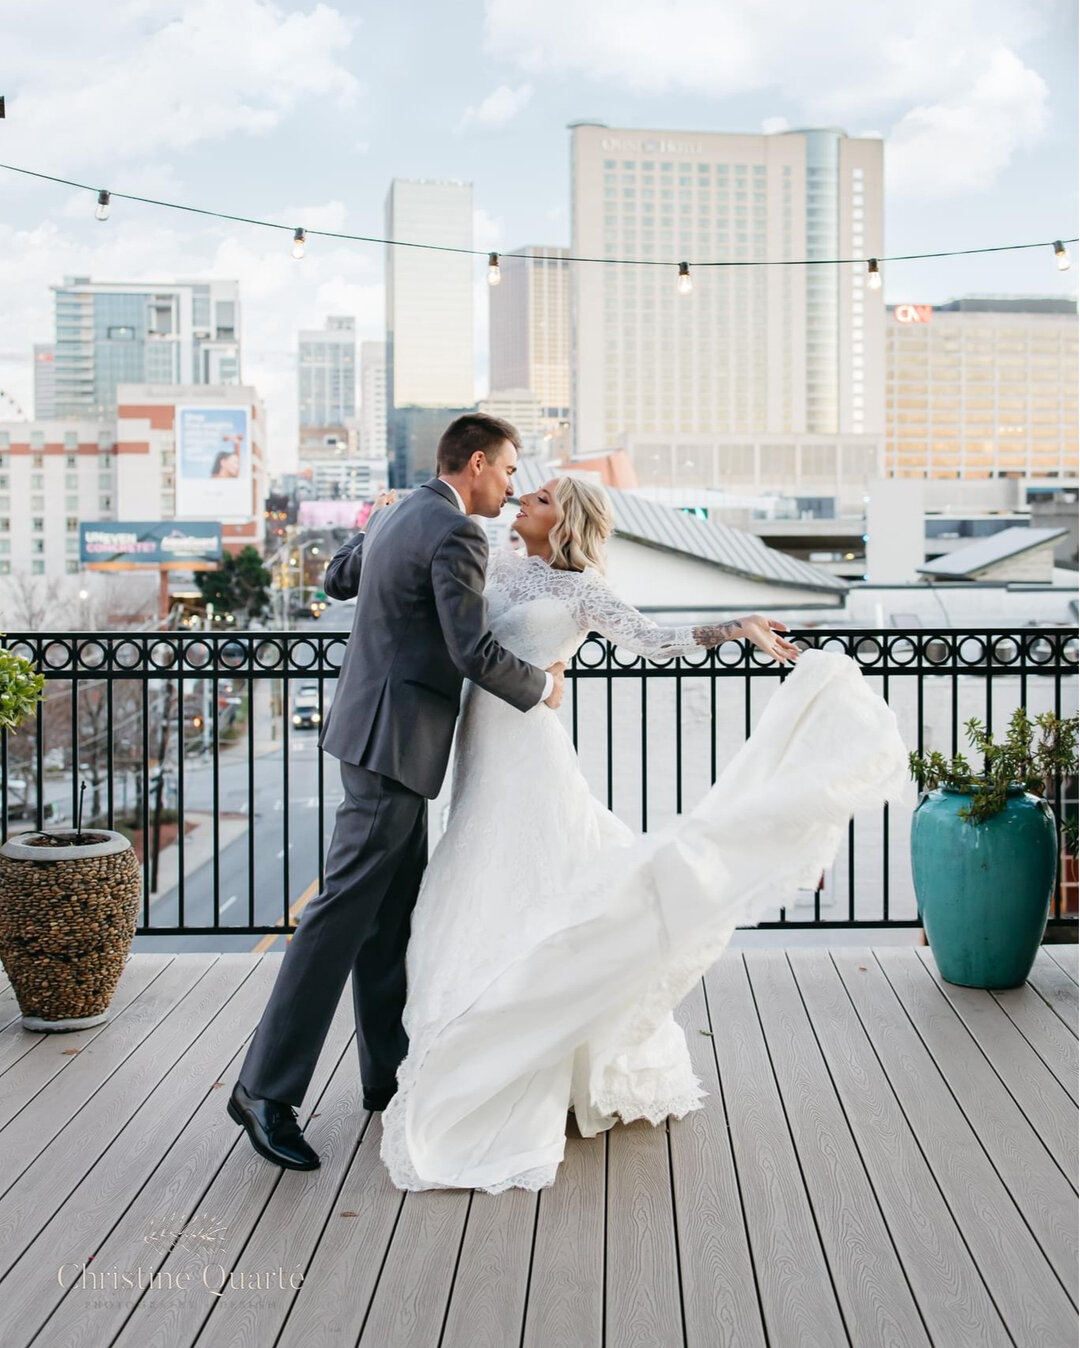 How about a wedding with the perfect city view😍​​​​​​​​
​​​​​​​​
Designer &amp; florist // @tintedeventdesigns​​​​​​​​
Planner // Rachele with @ityndaleevents​​​​​​​​
Venue // @terminus330​​​​​​​​
Getting Ready // @hyatthouseatldowntown​​​​​​​​
DJ &